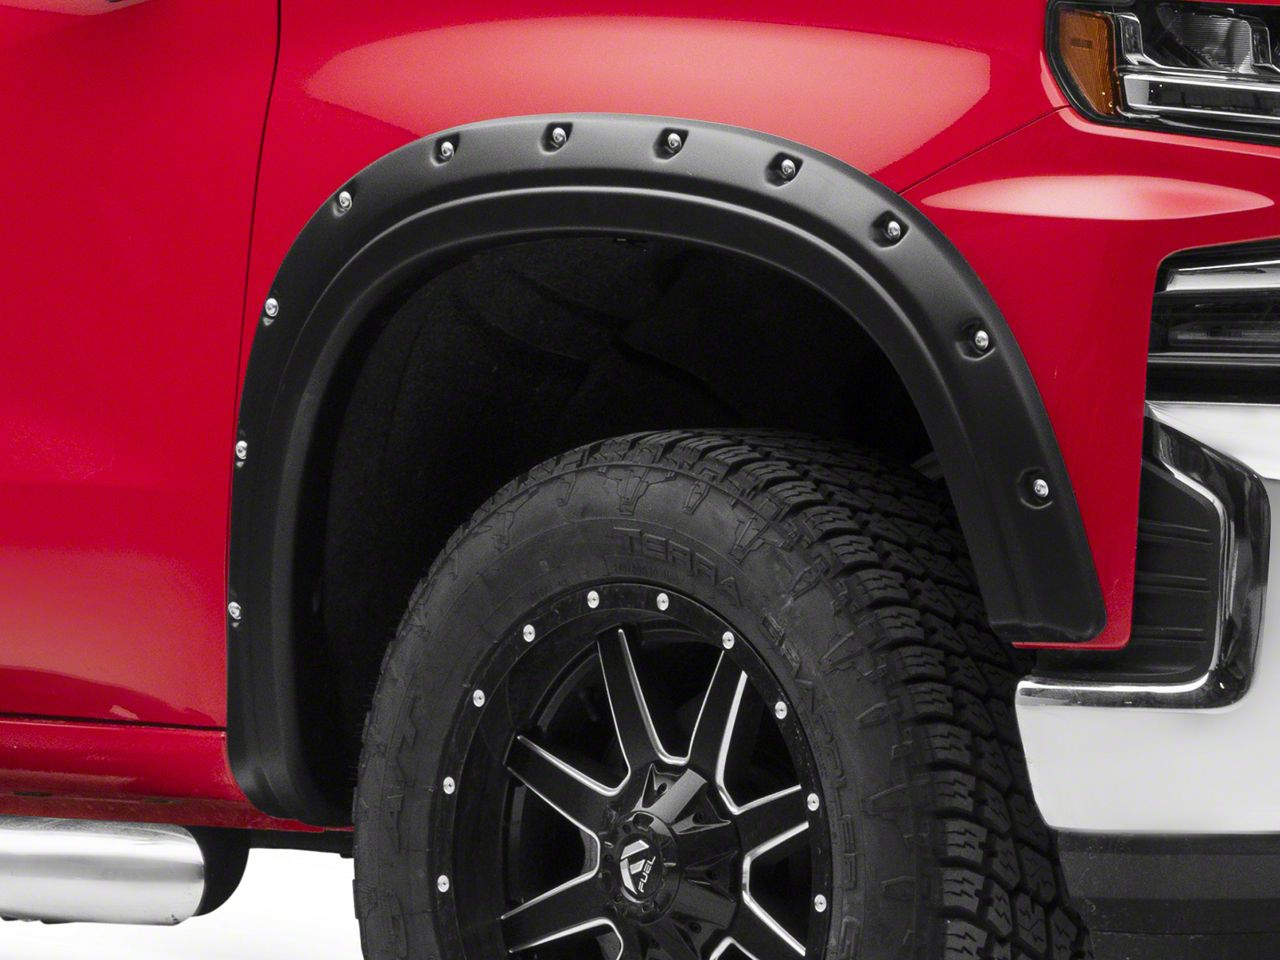 2019-2021 Chevy Silverado 1500Flat fits Rough Country Pocket Fender Flares